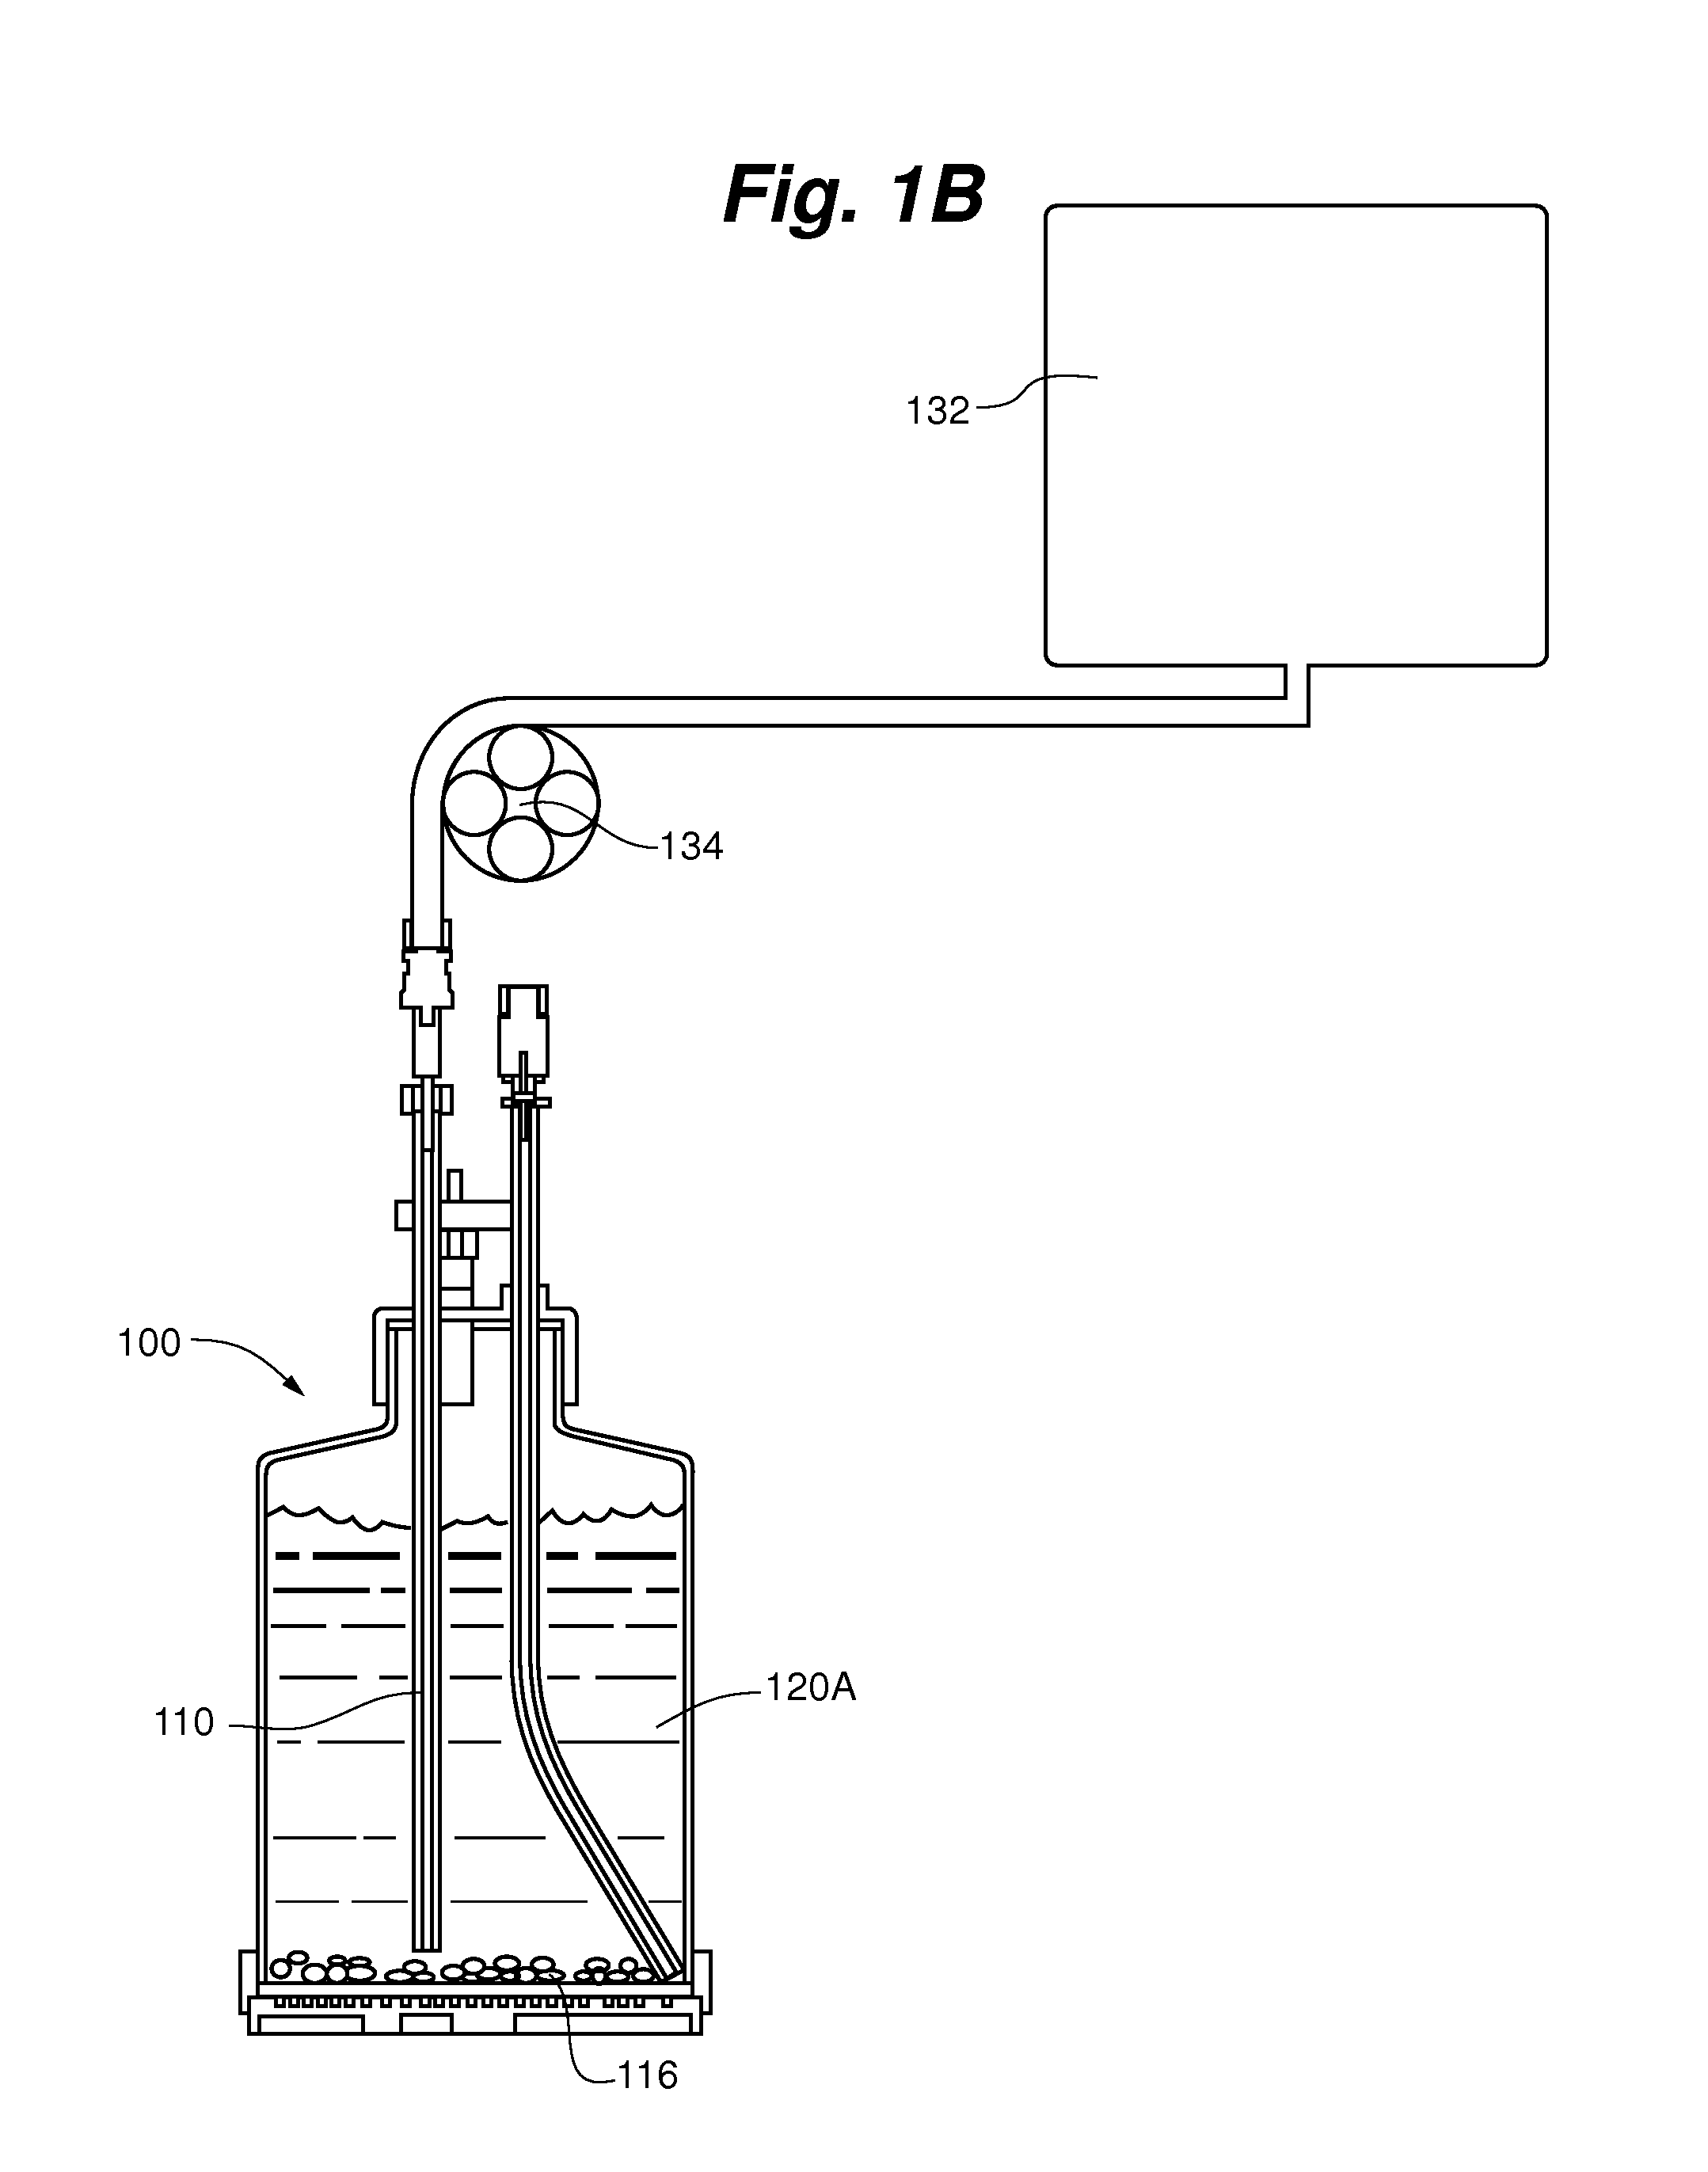 Closed system device and methods for gas permeable cell culture process